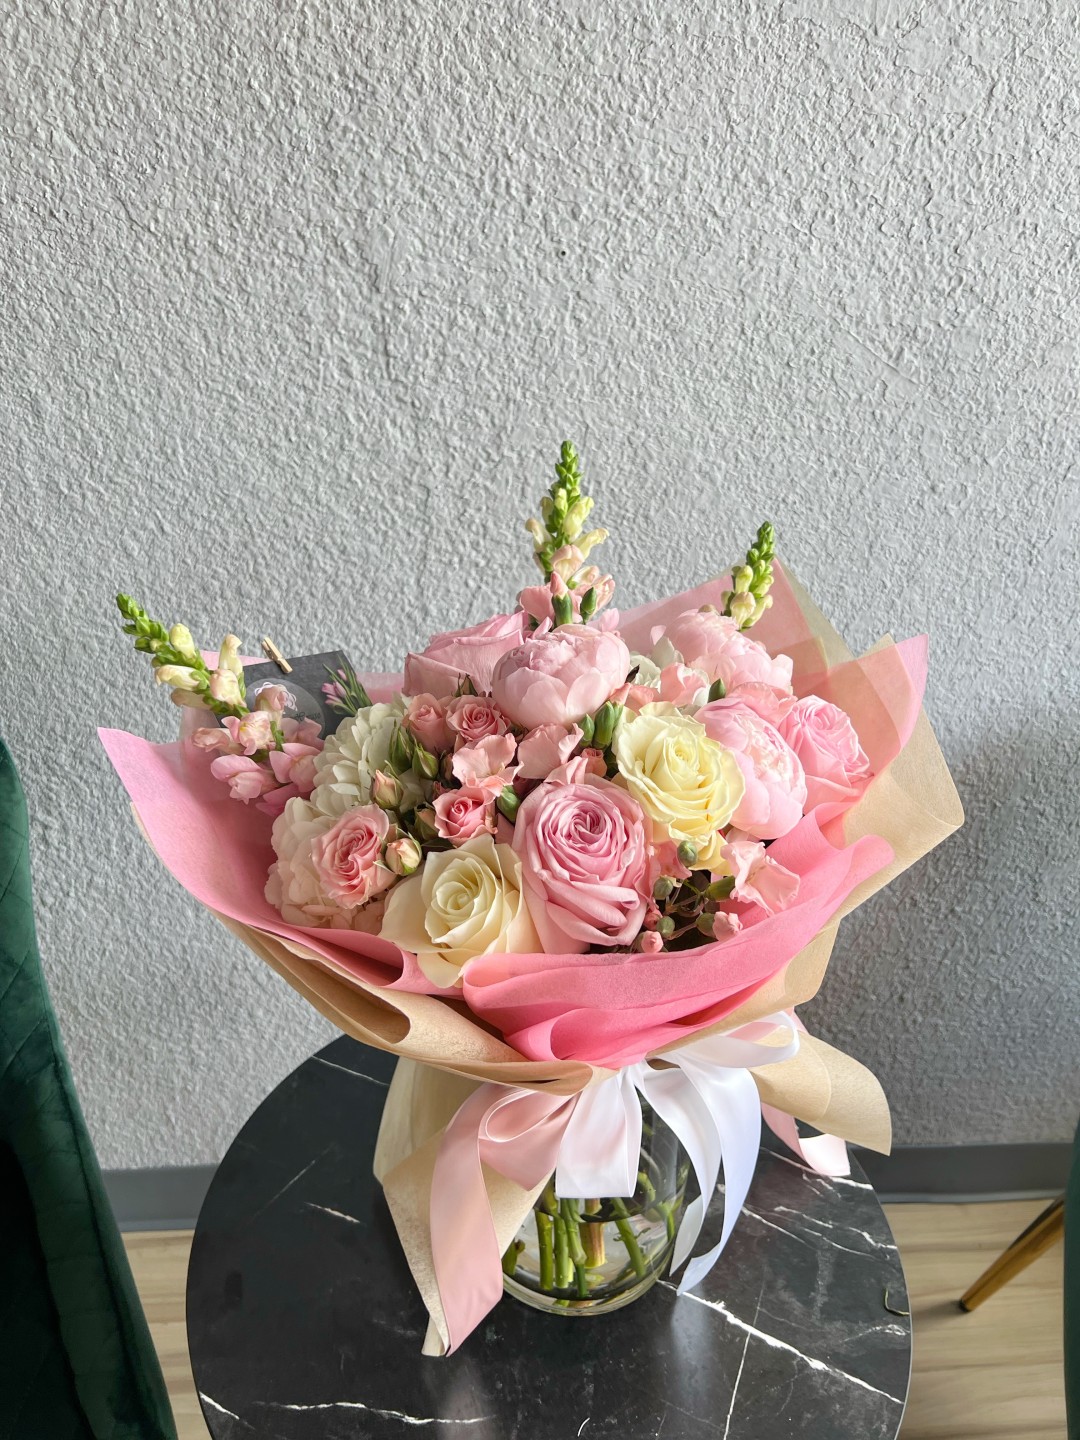 Meara Hand-Tied Bouquet